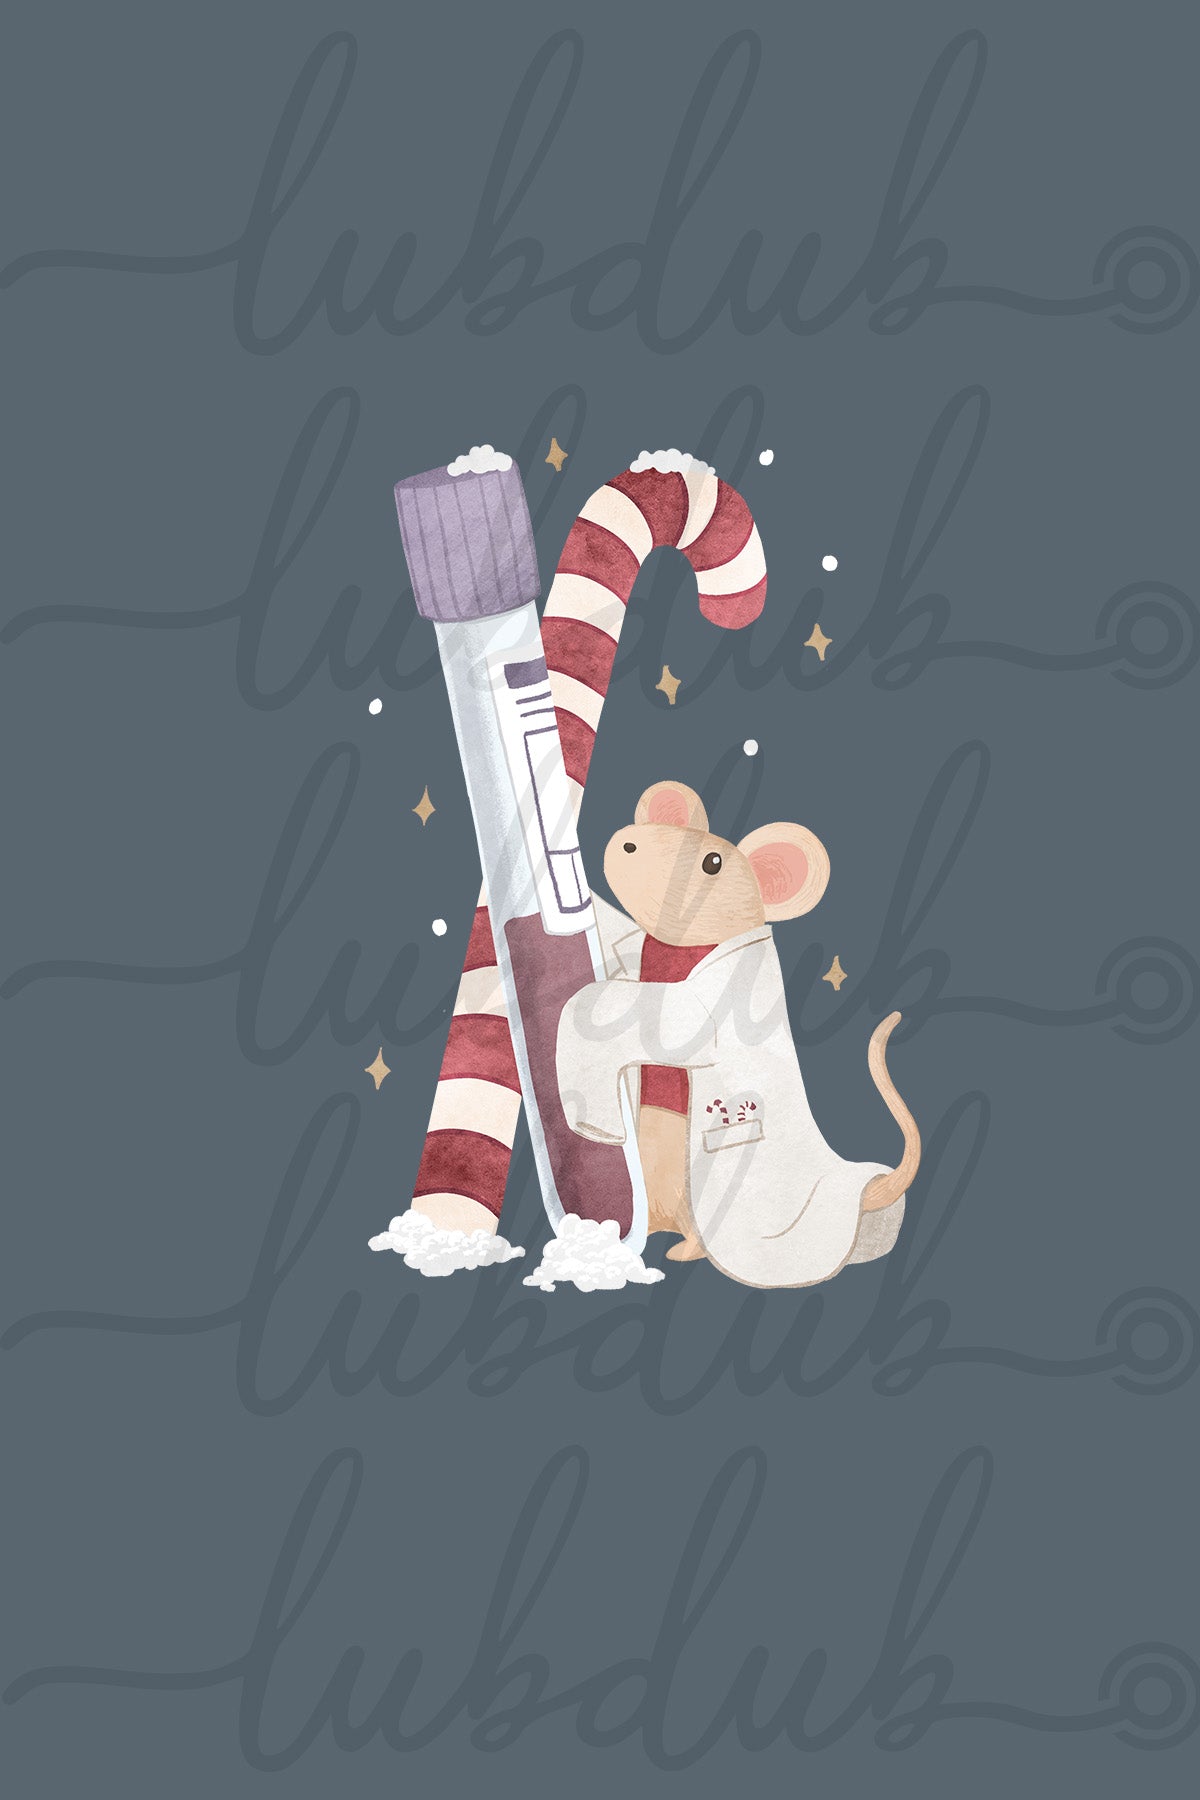 Candy Cane Lab - Non-Pocketed Crew Sweatshirt